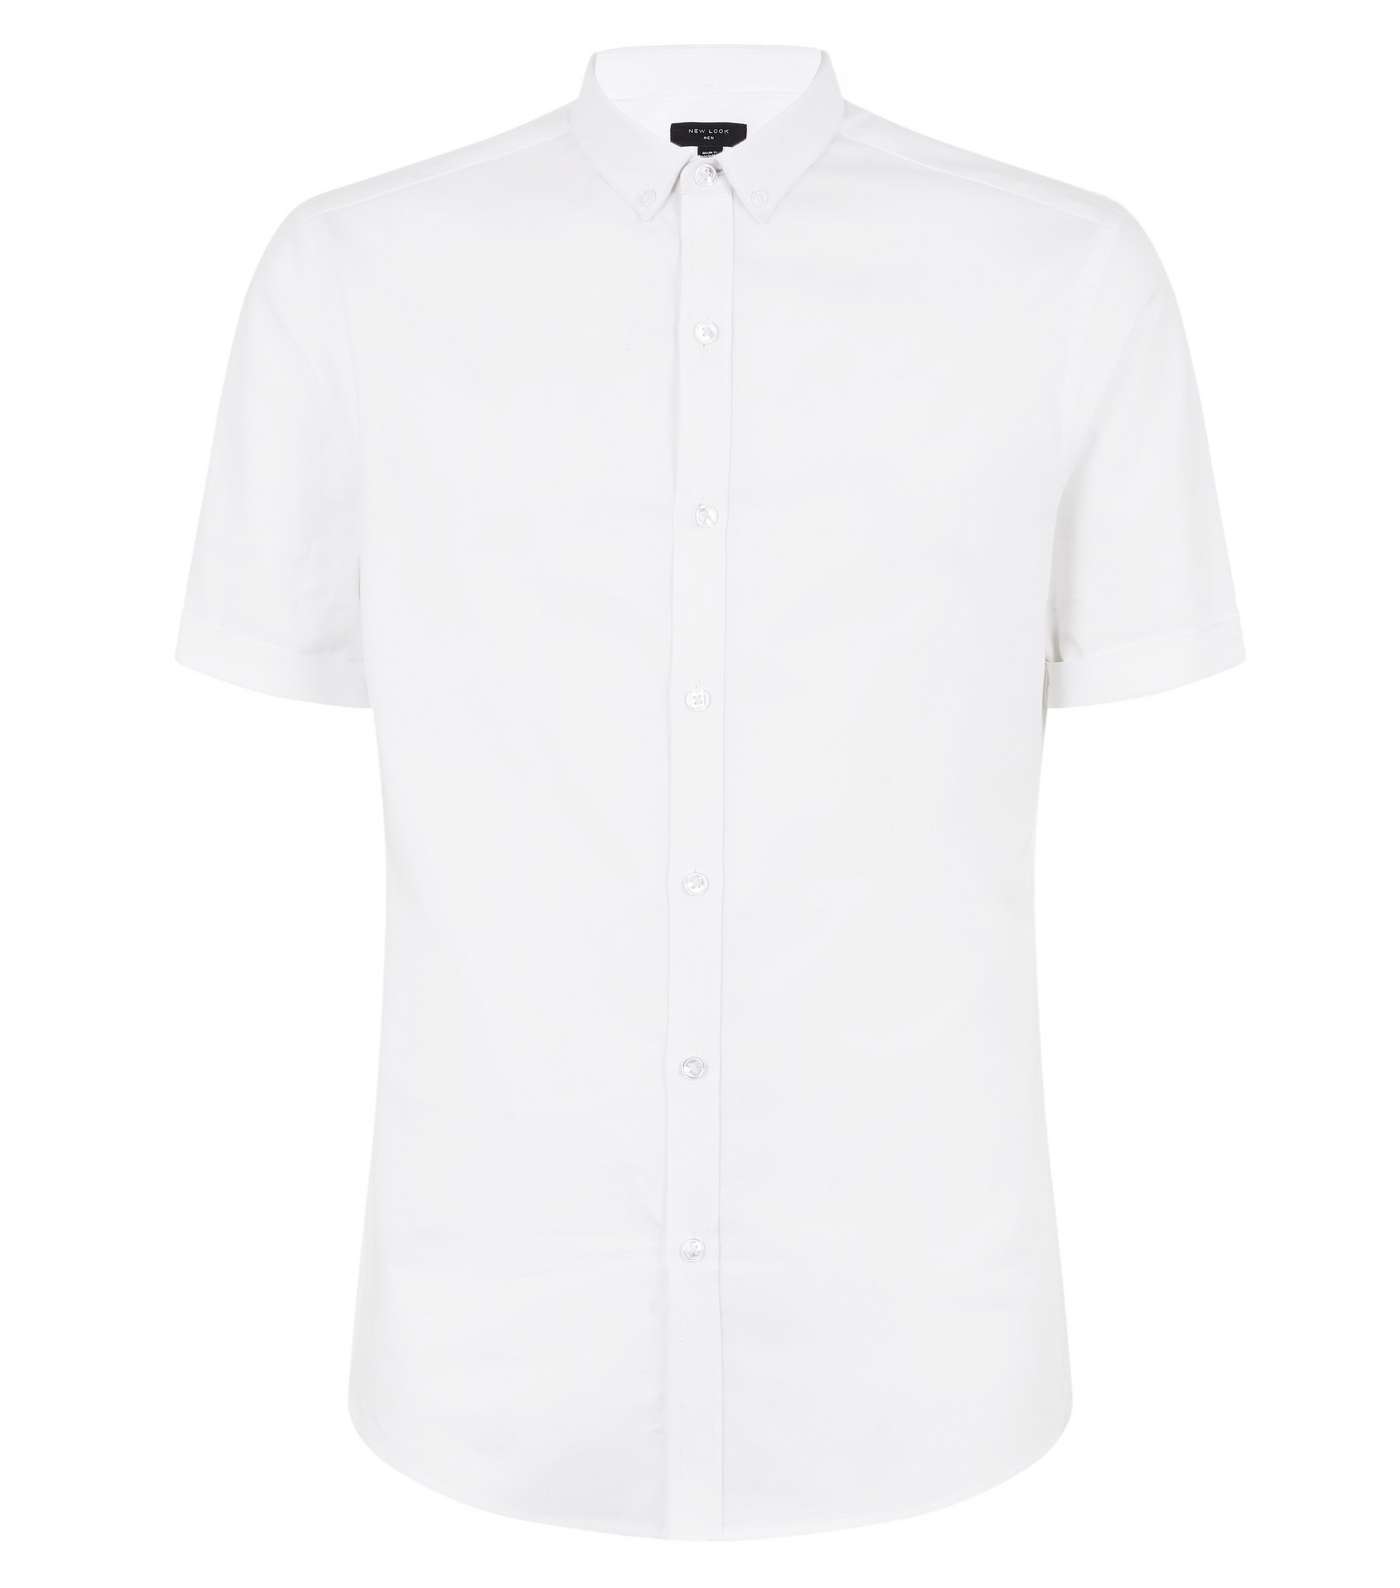 White Muscle Fit Short Sleeve Oxford Shirt Image 4